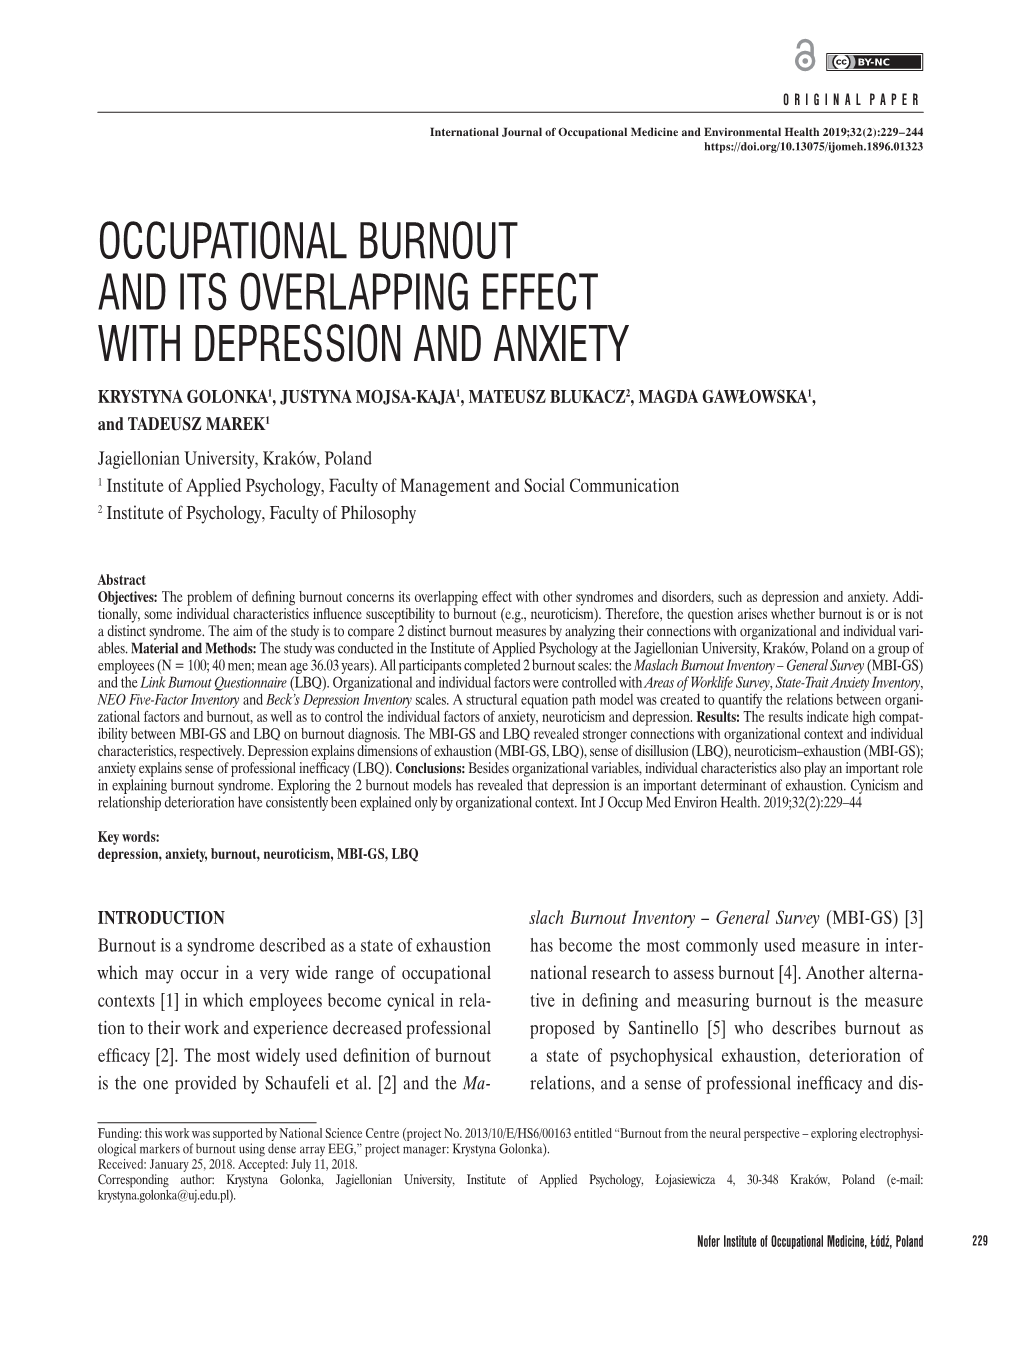 Occupational Burnout and Its Overlapping Effect with Depression and Anxiety